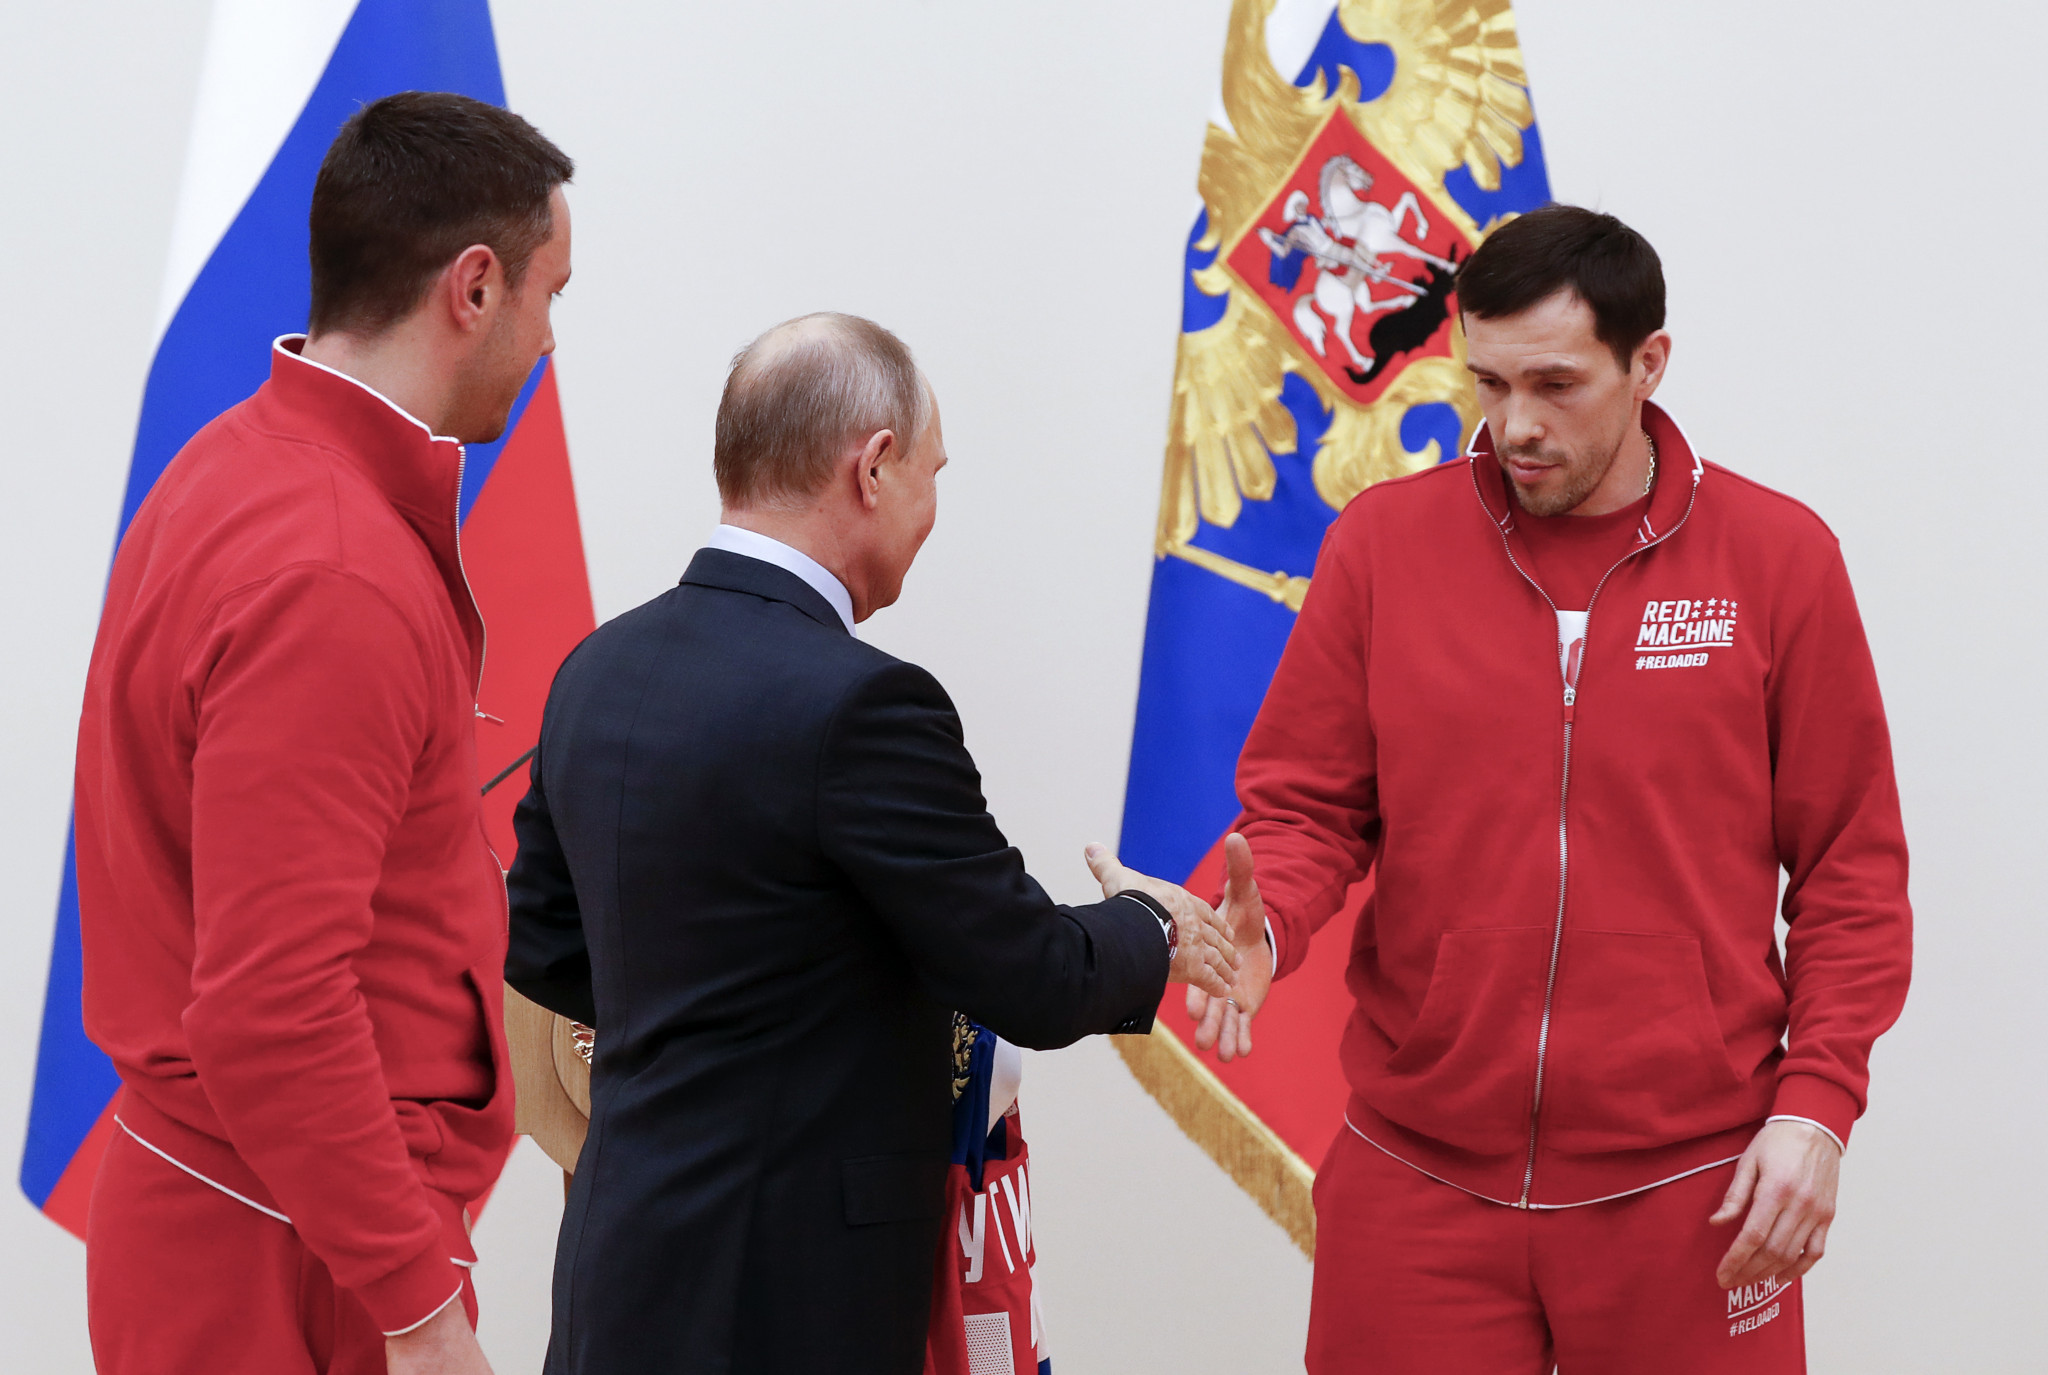 Olympic Athletes from Russia ice hockey players Ilya Kovalchuk and Pavel Datsyuk met President Vladimir Putin in Moscow today before leaving for Pyeongchang 2018, where many see them as favourites ©Getty Images